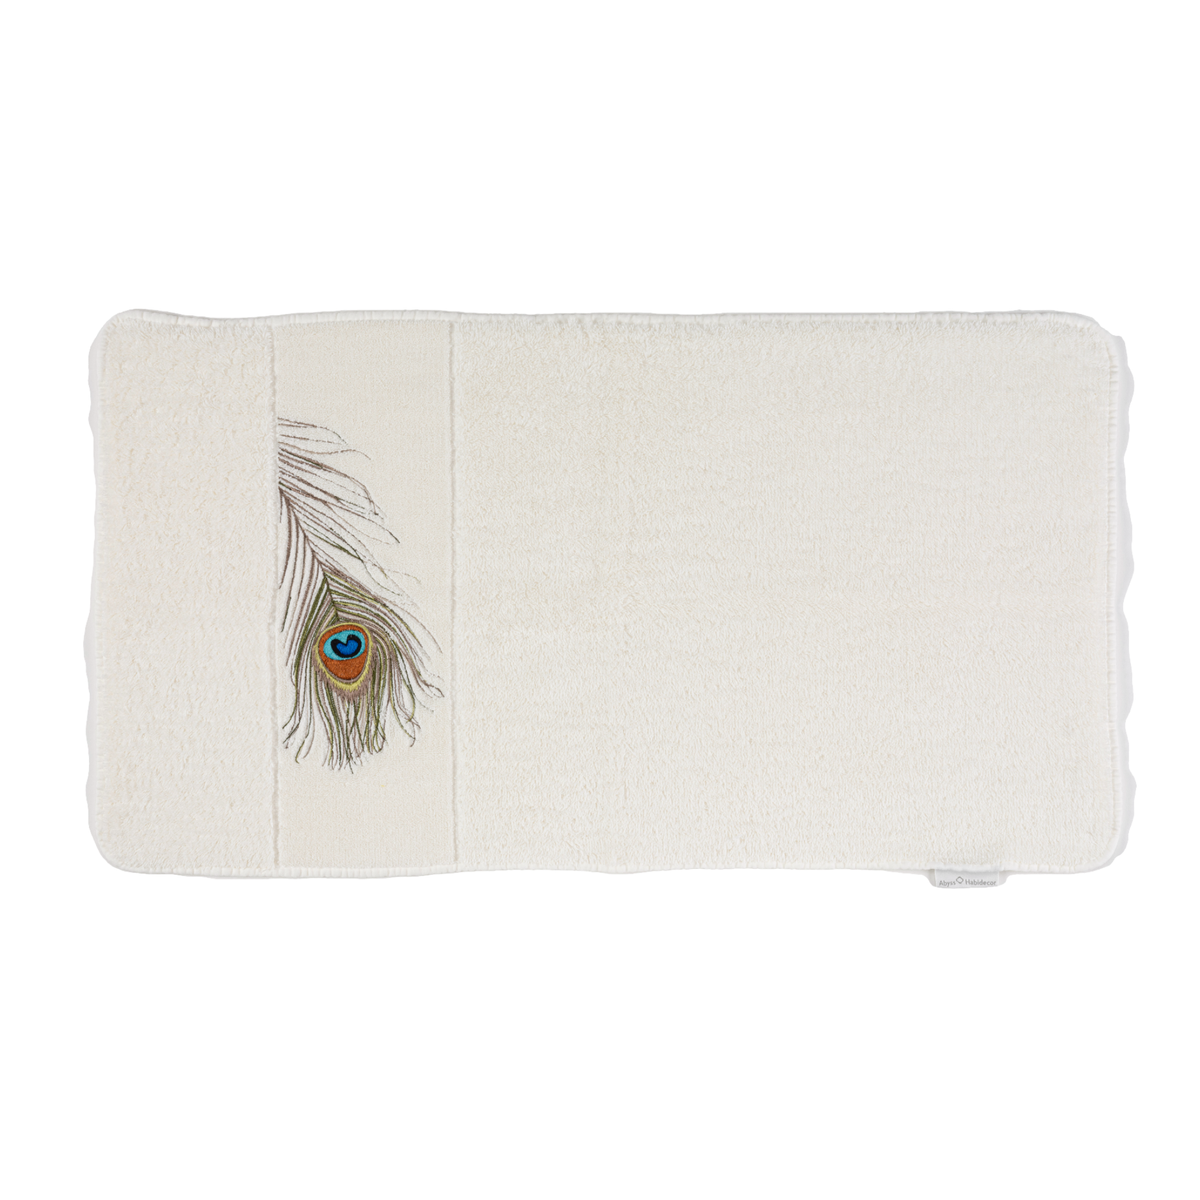 Flat Abyss Paleo Hand Towels against White Background